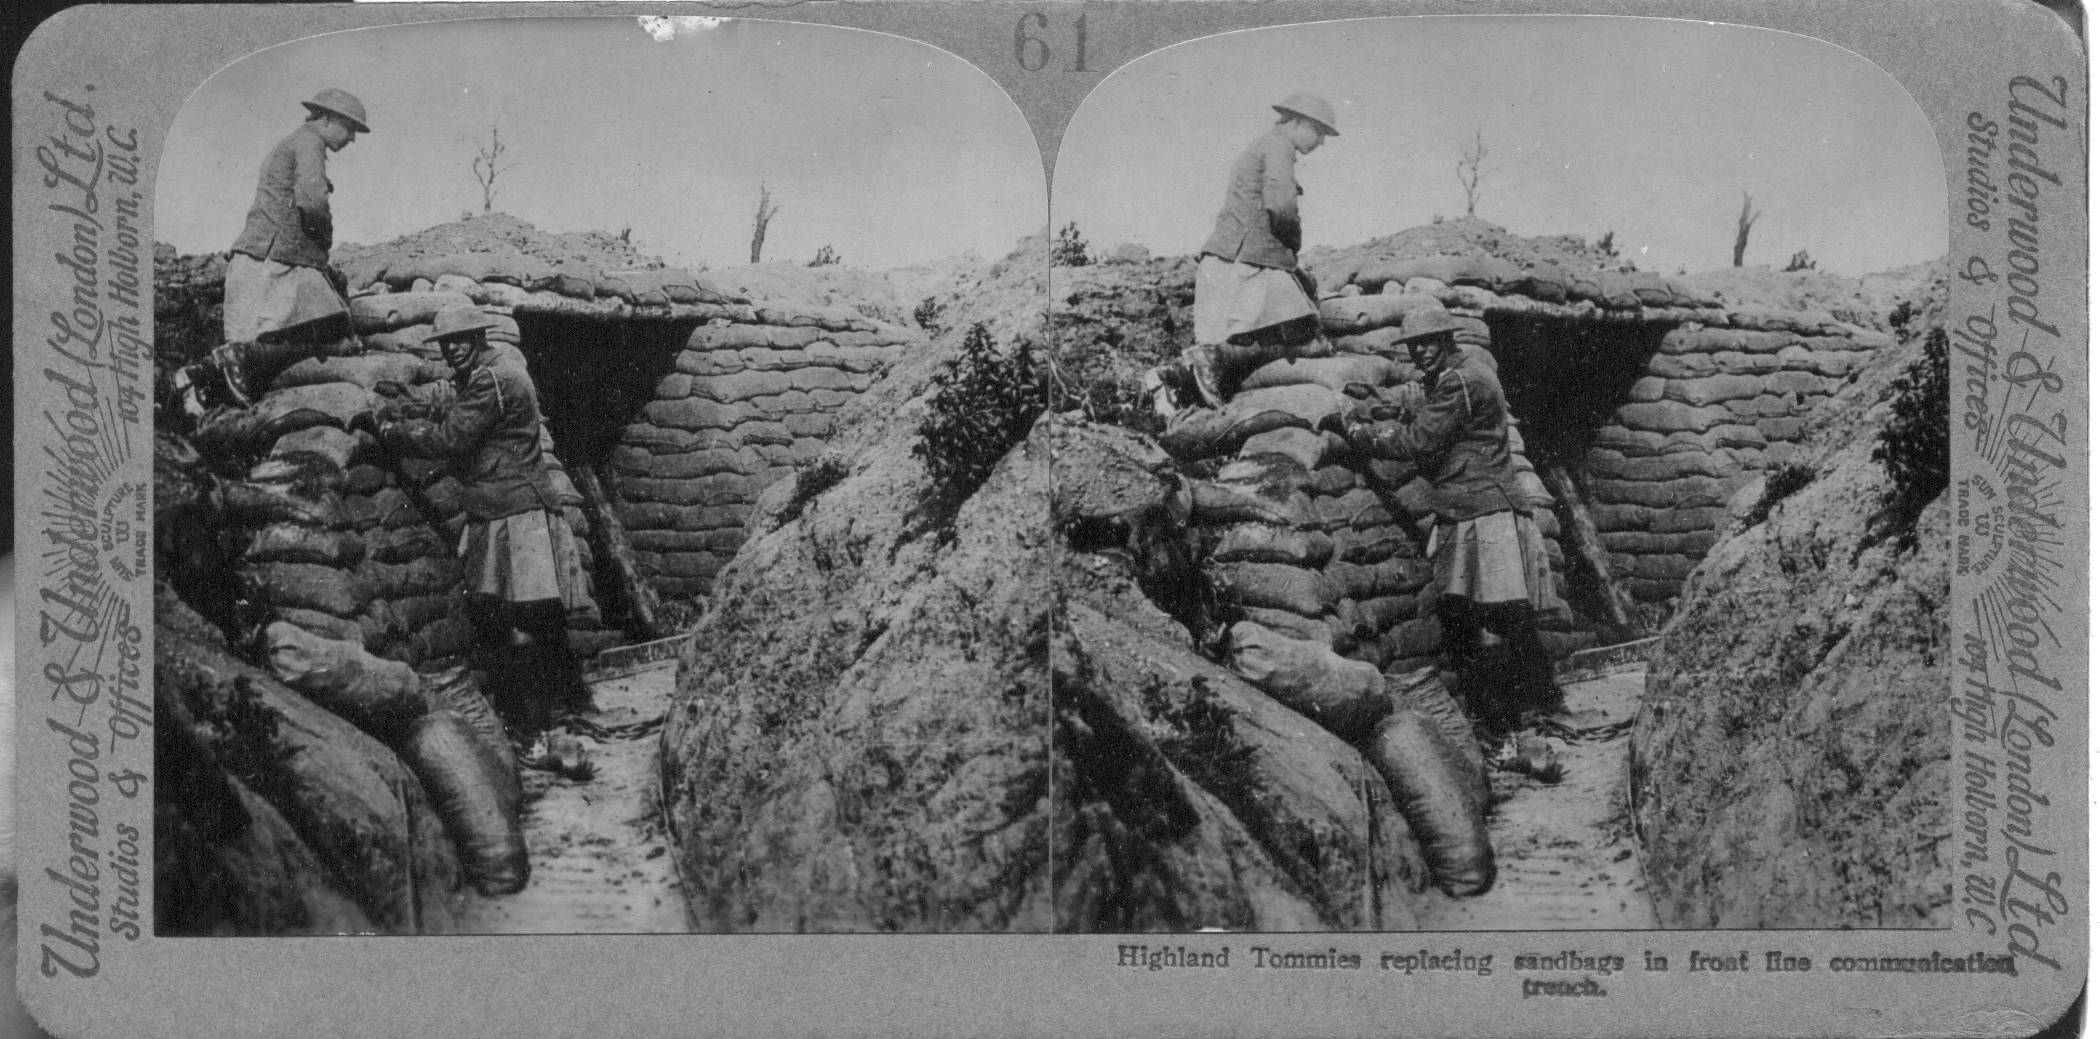 Highland Tommies replacing sandbags in front line communication trench